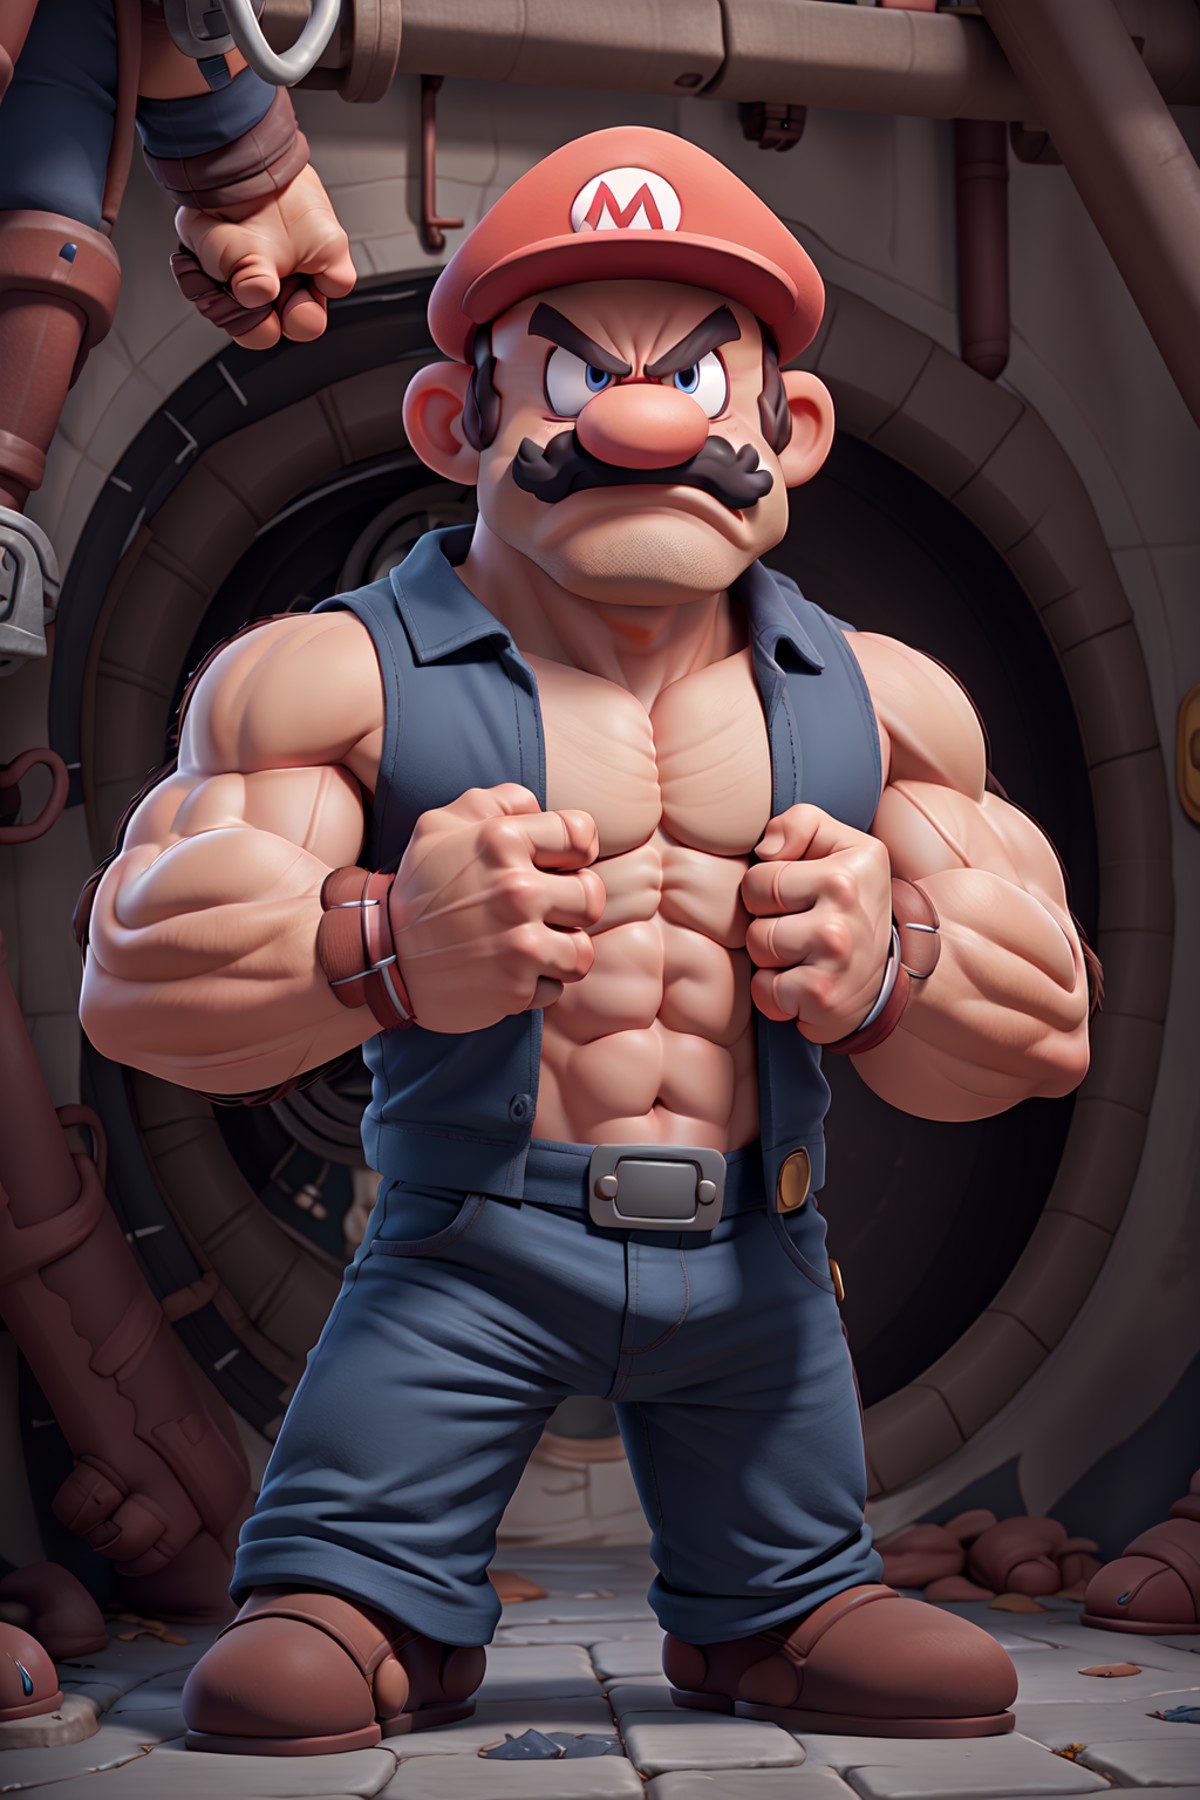 masterpiece, best quality, muscular shirtless angry super mario in the sewer